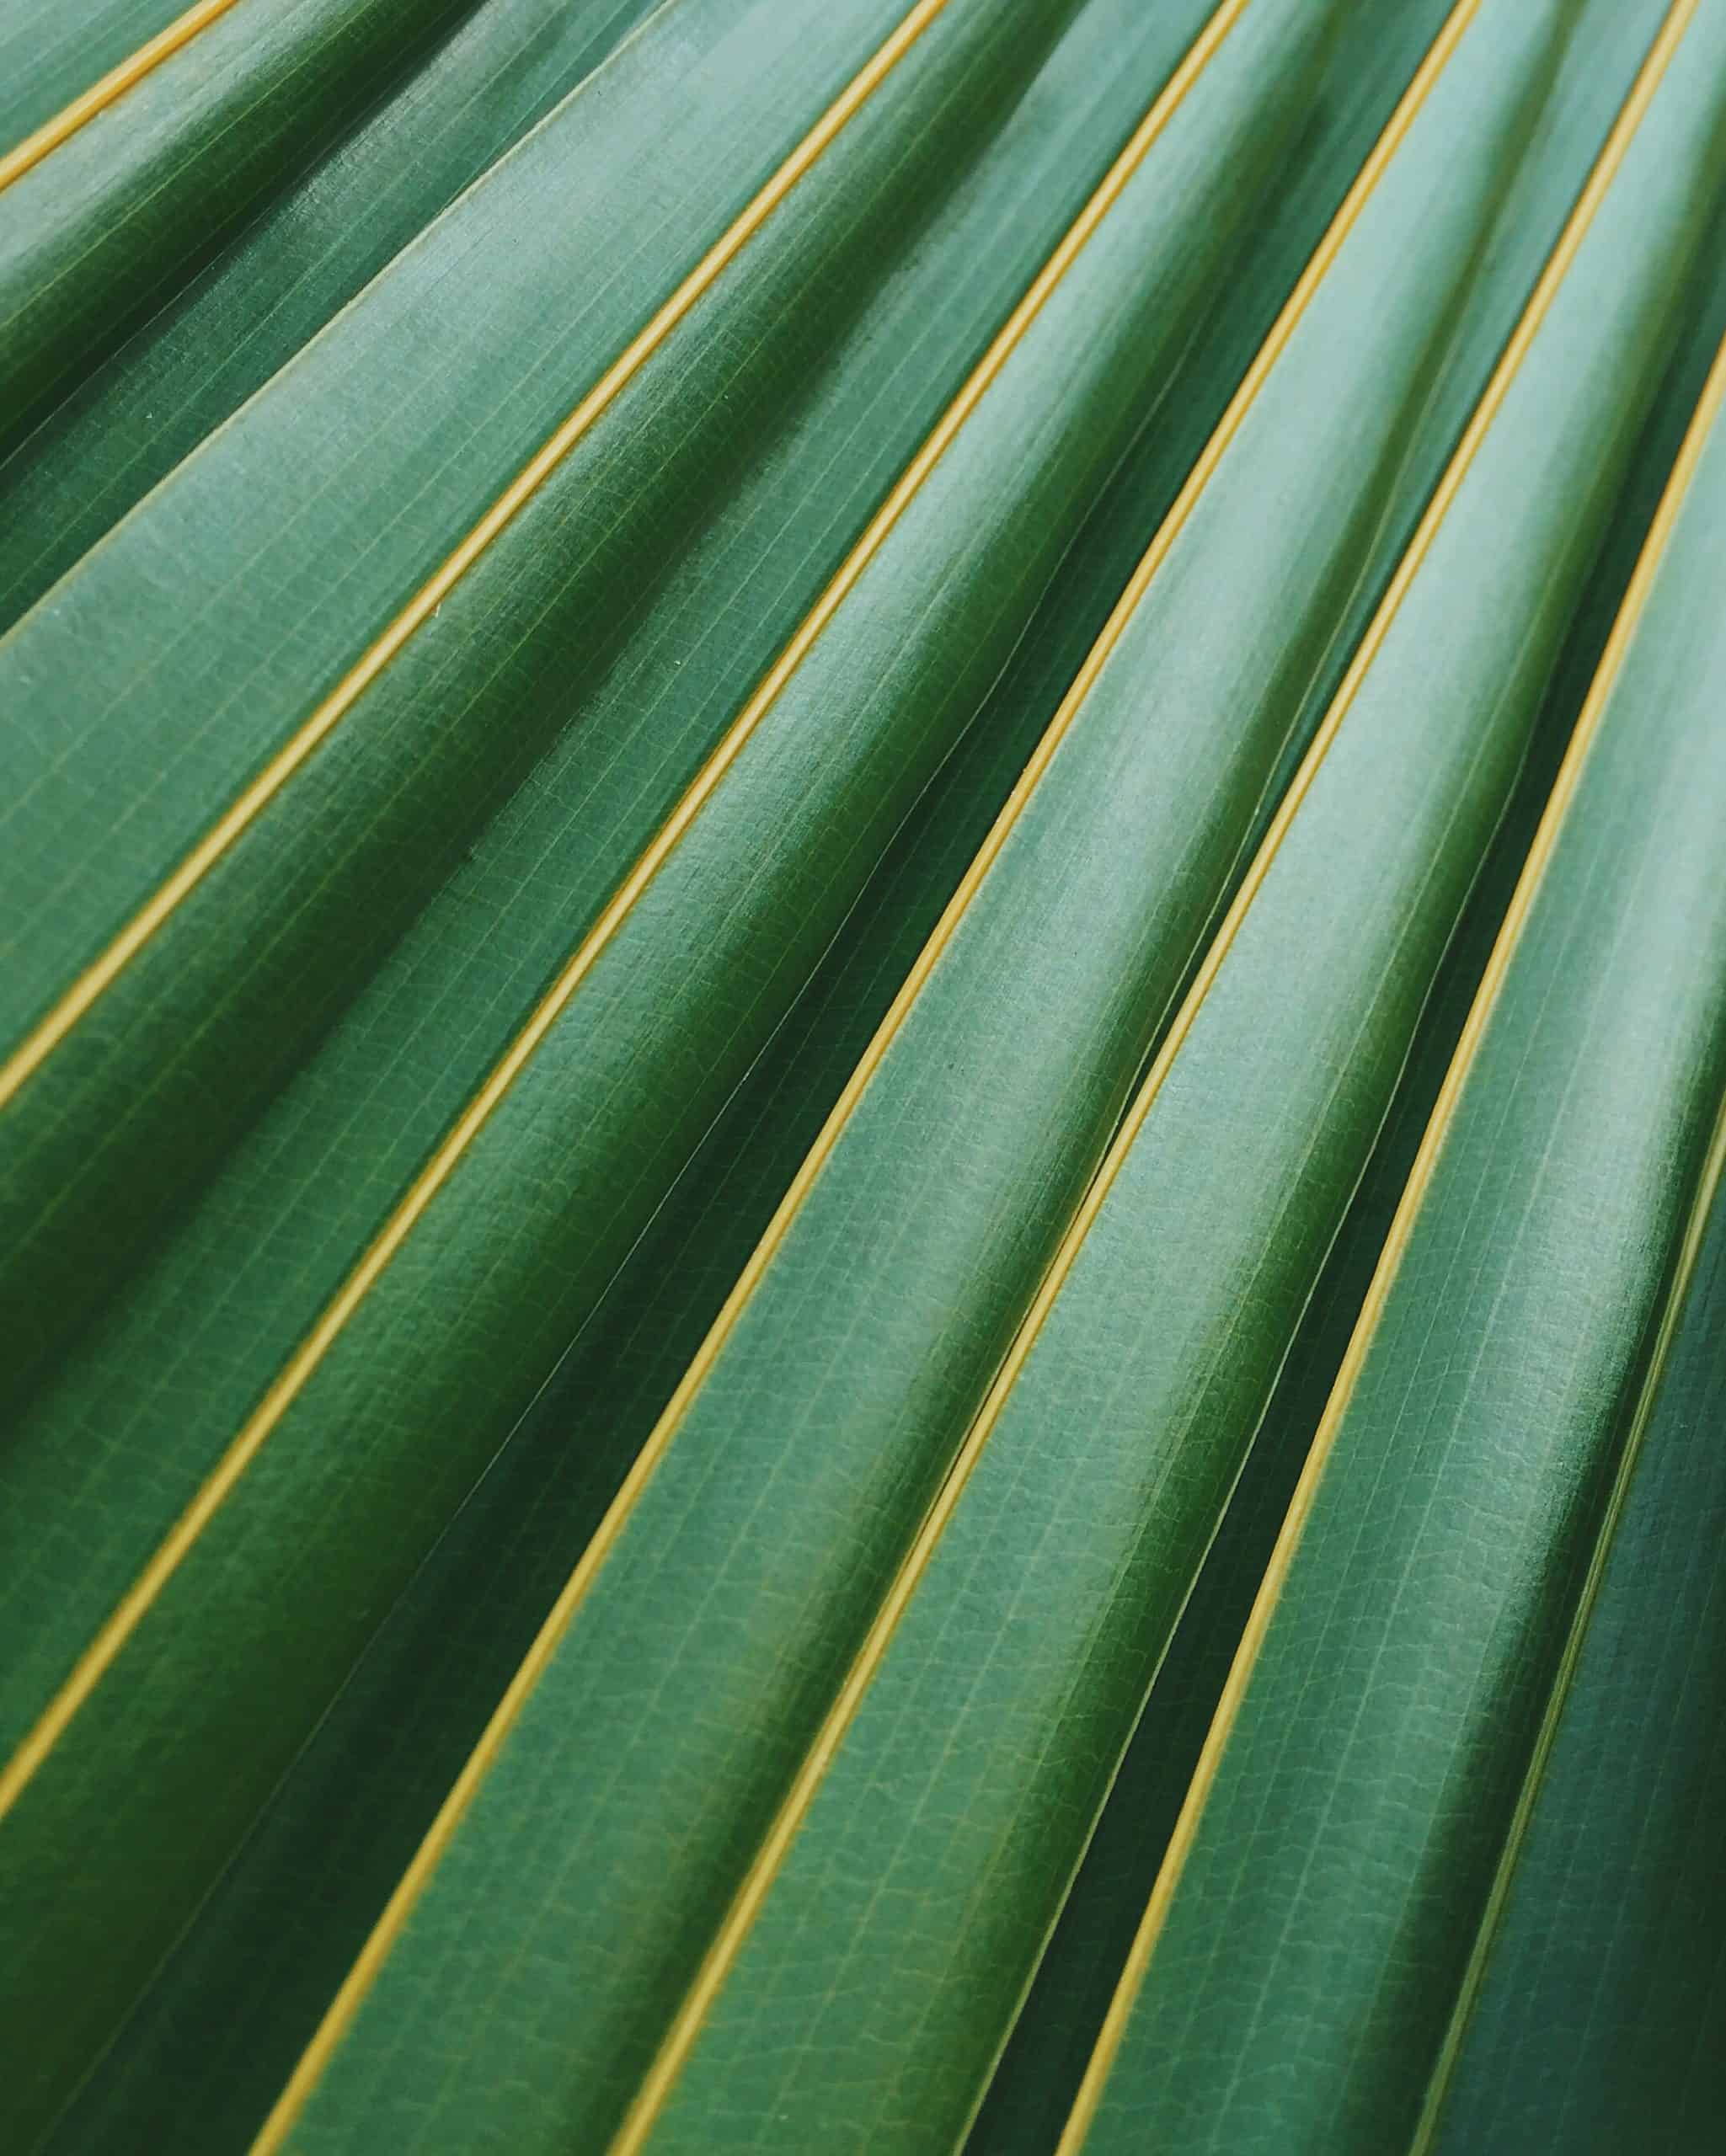 Palm Sunday in the Bible